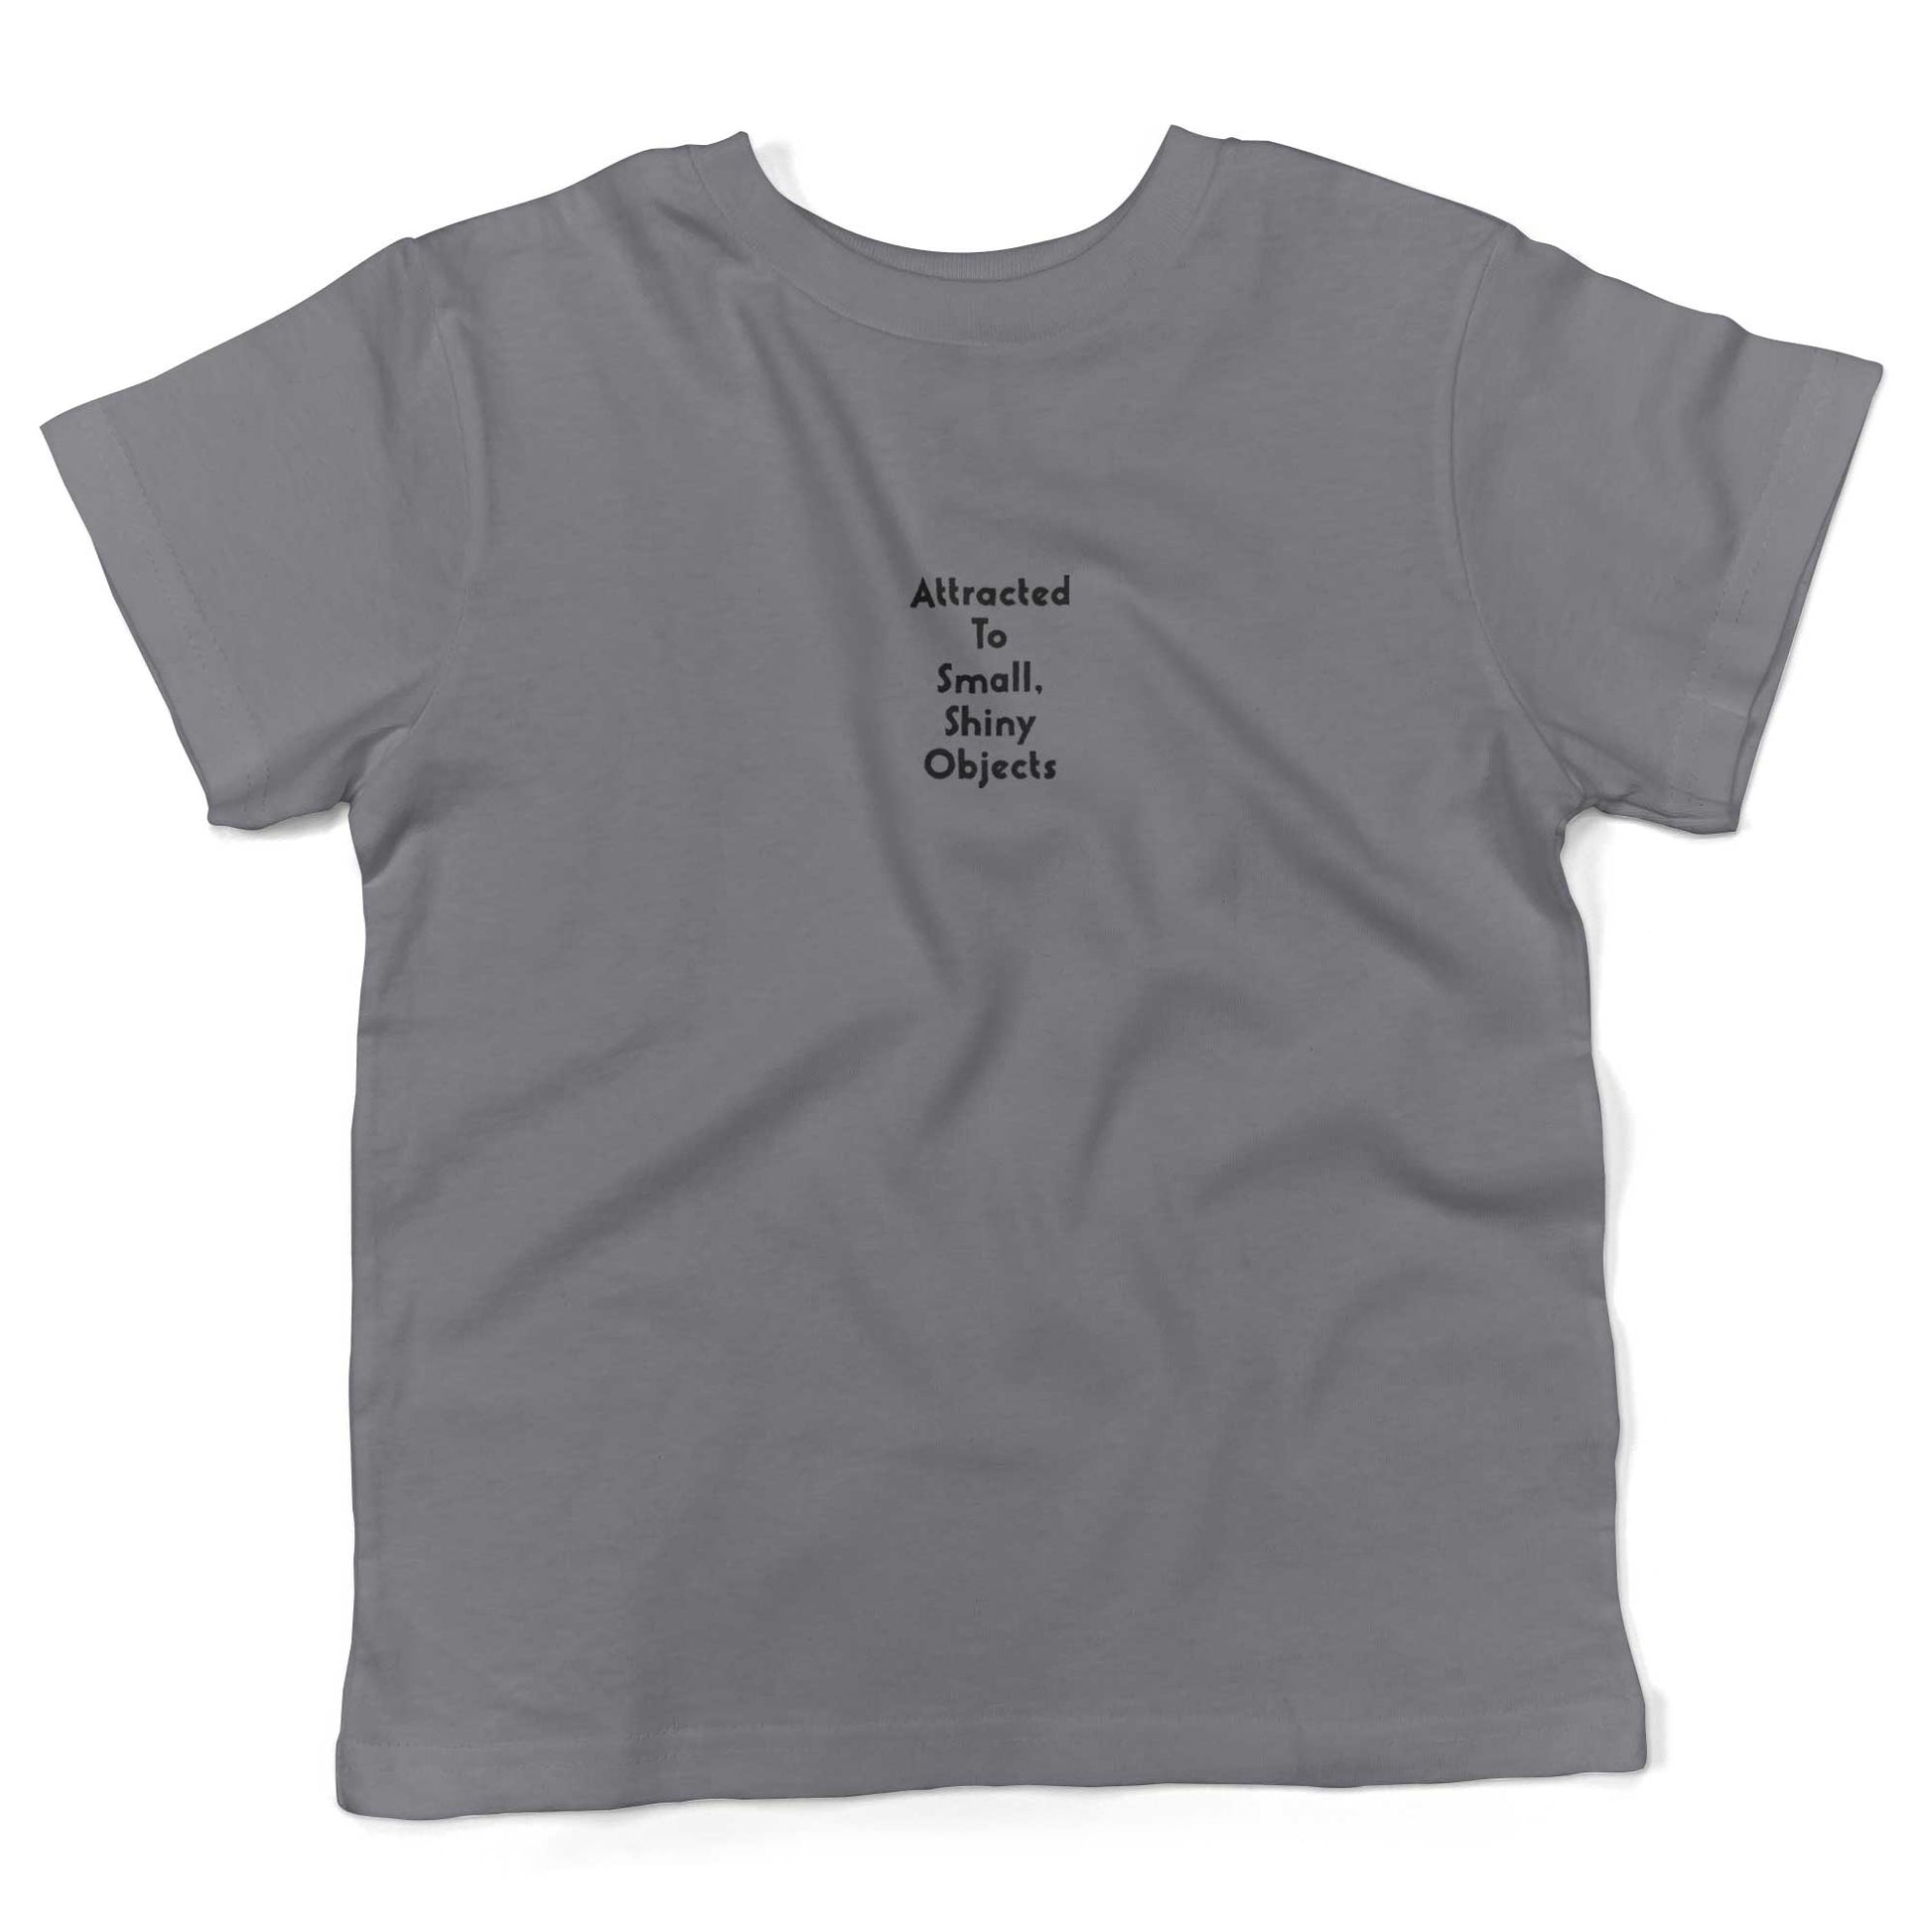 Attracted To Small, Shiny Objects Toddler Shirt-Slate-2T